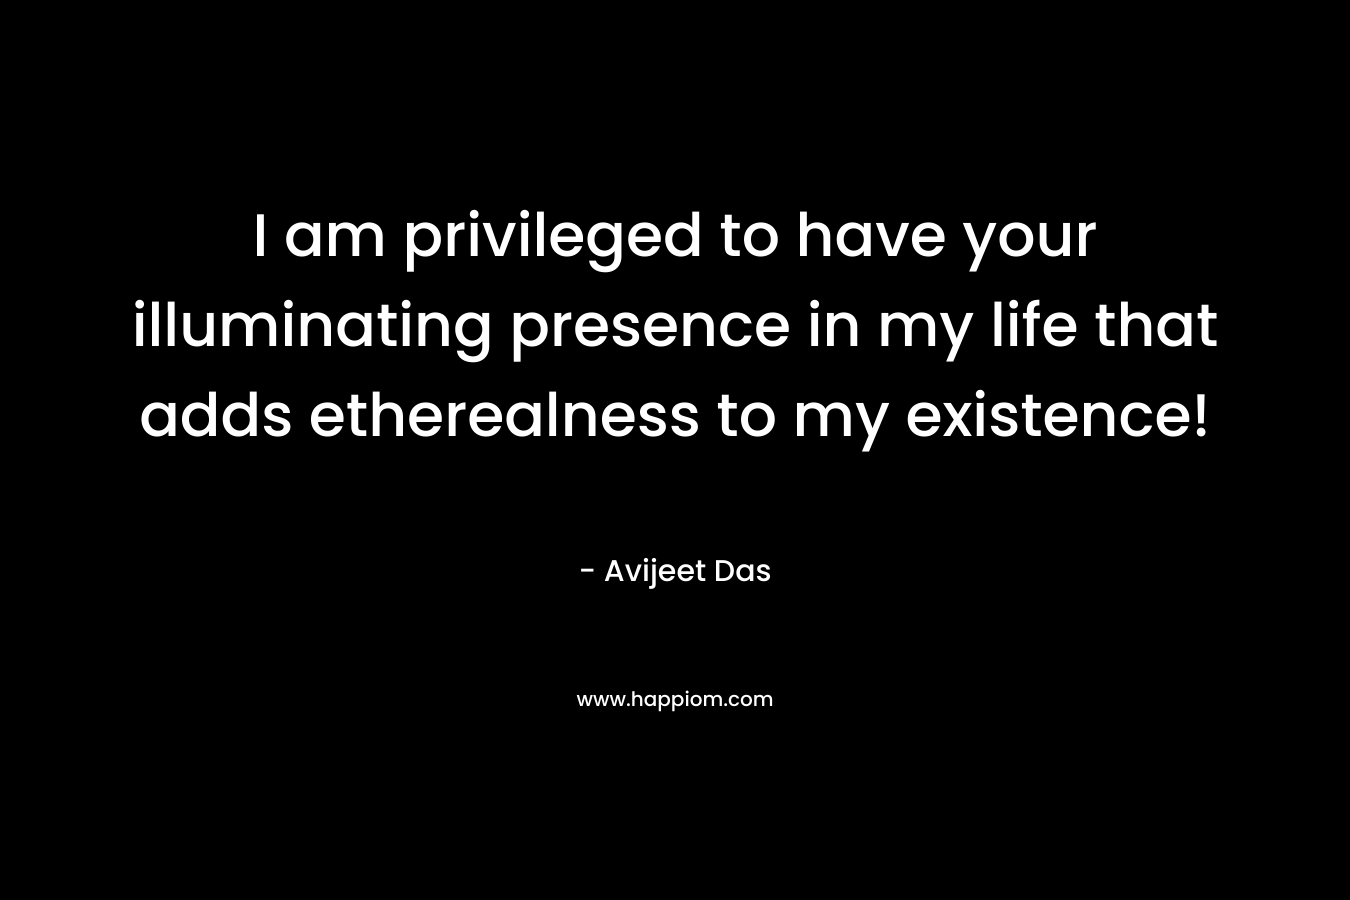 I am privileged to have your illuminating presence in my life that adds etherealness to my existence!